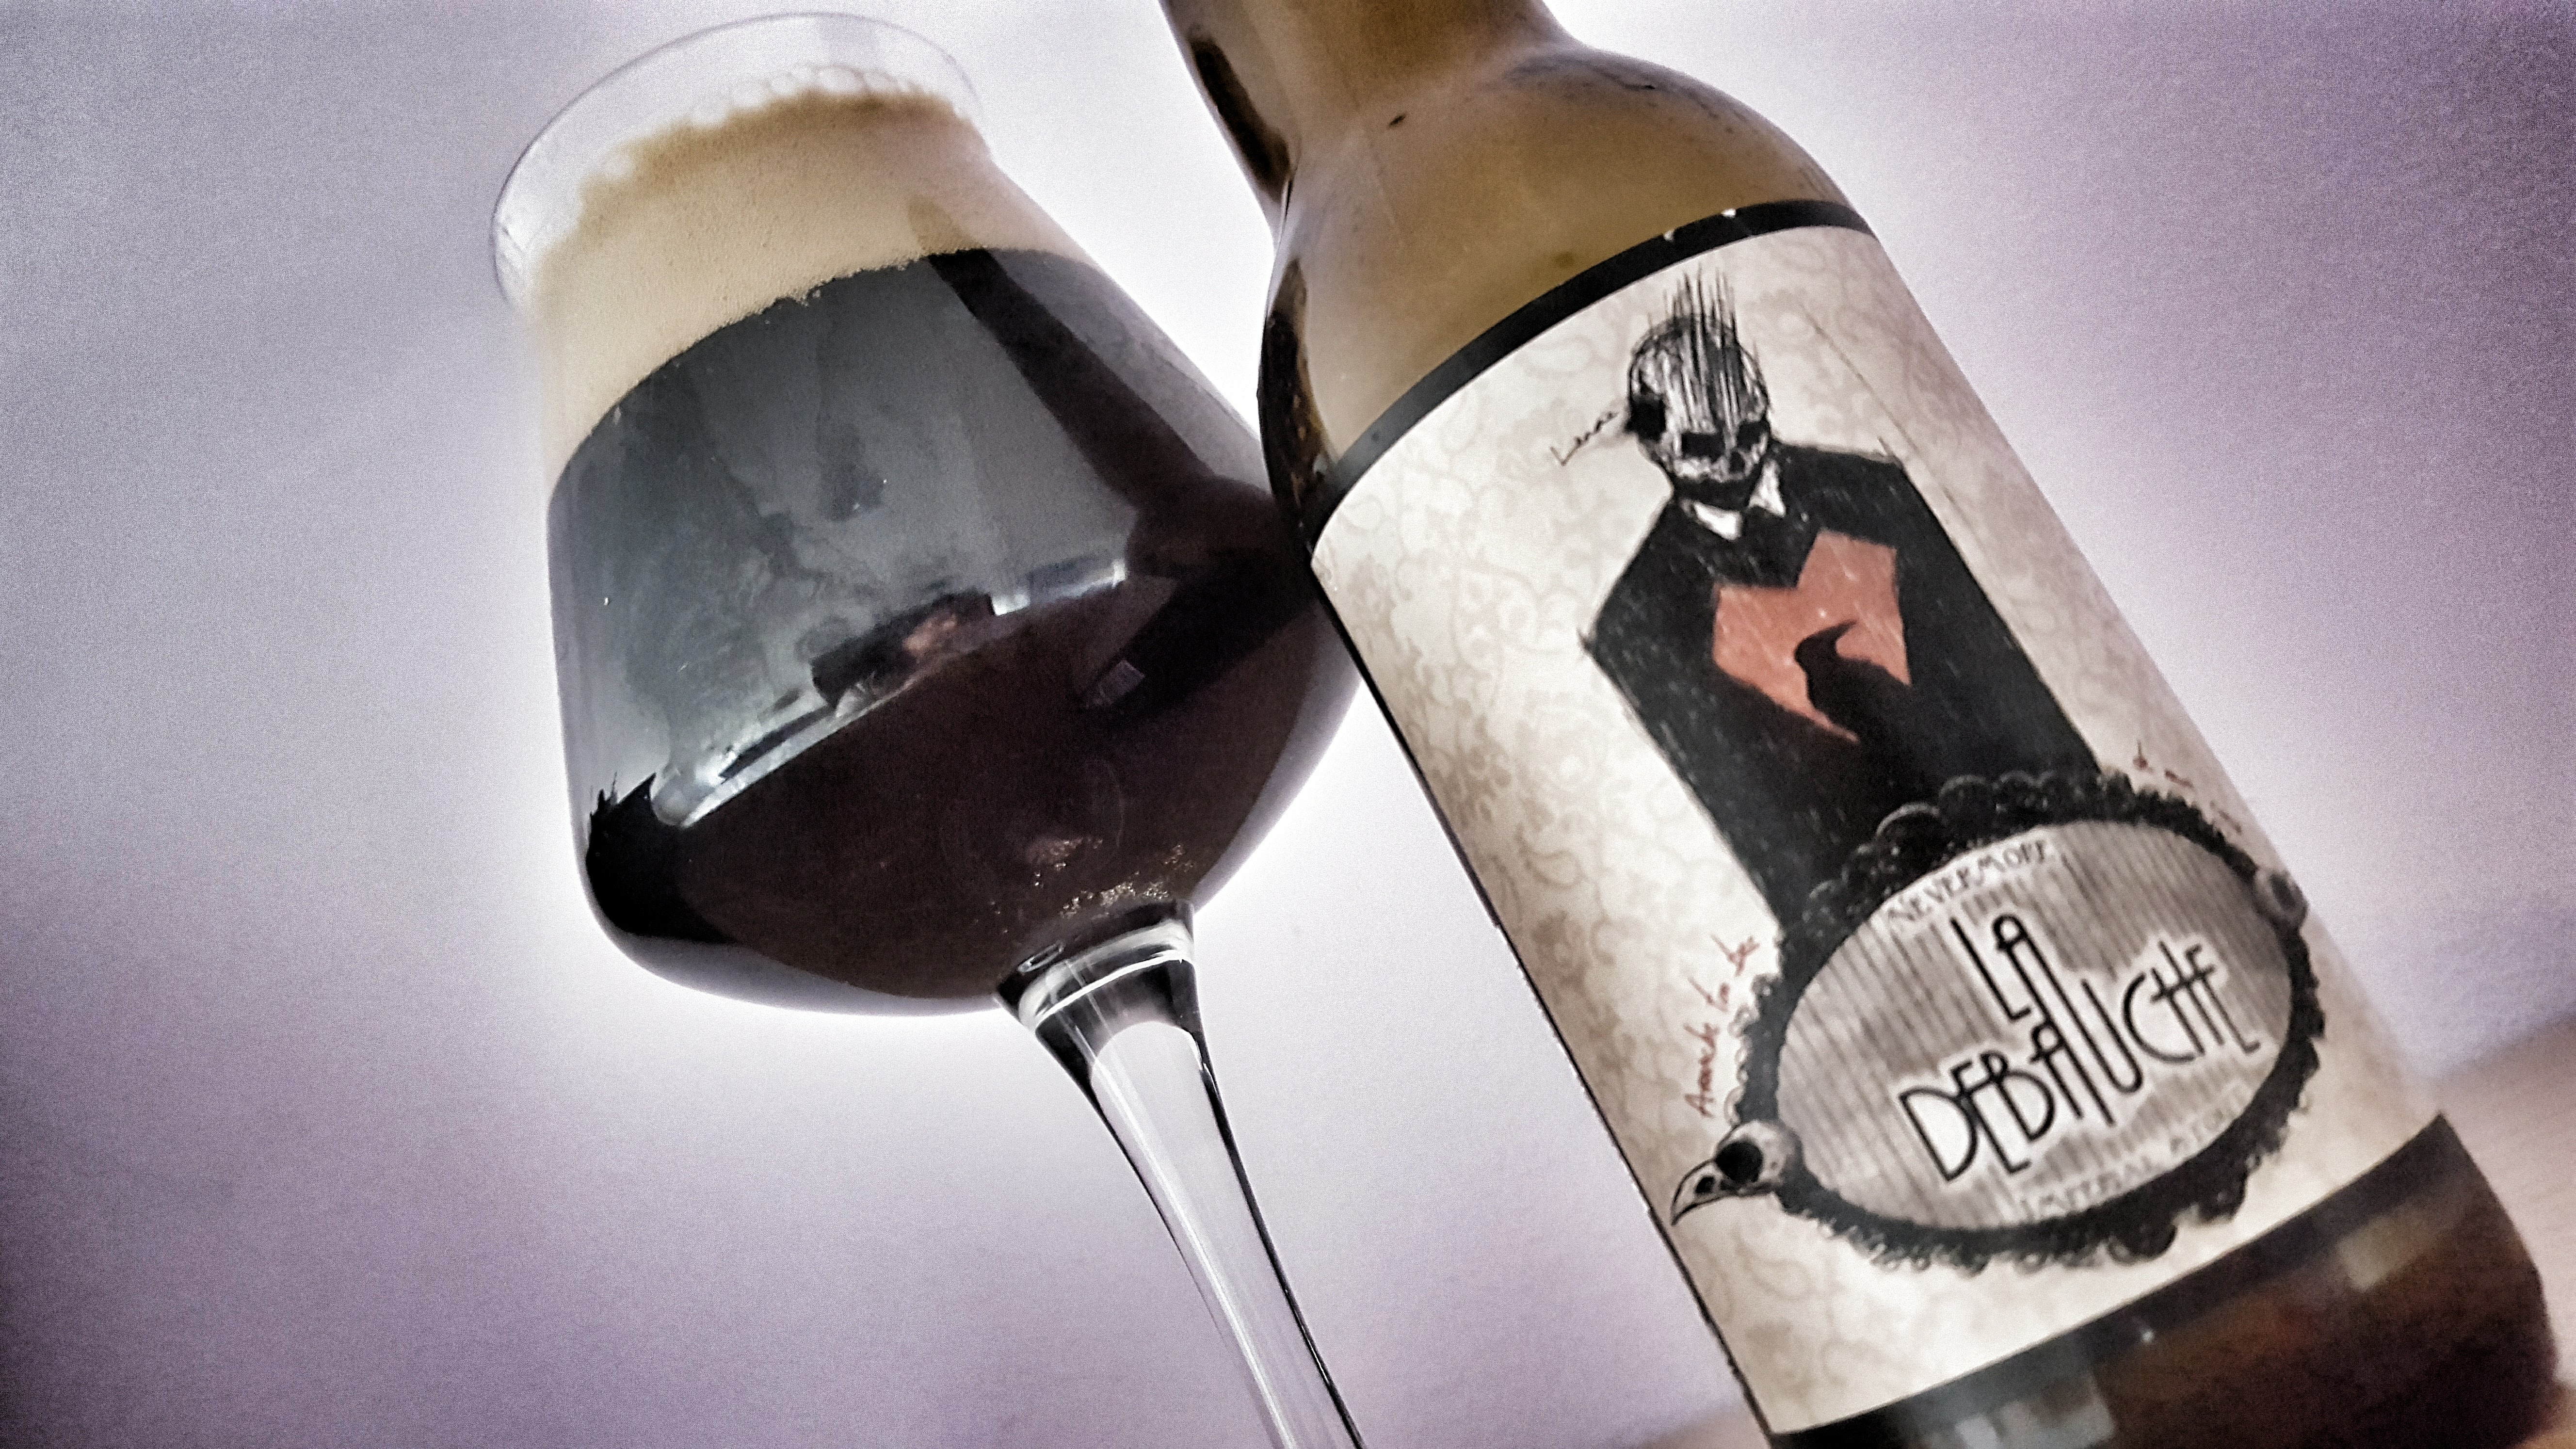 Nevermore Imperial Stout